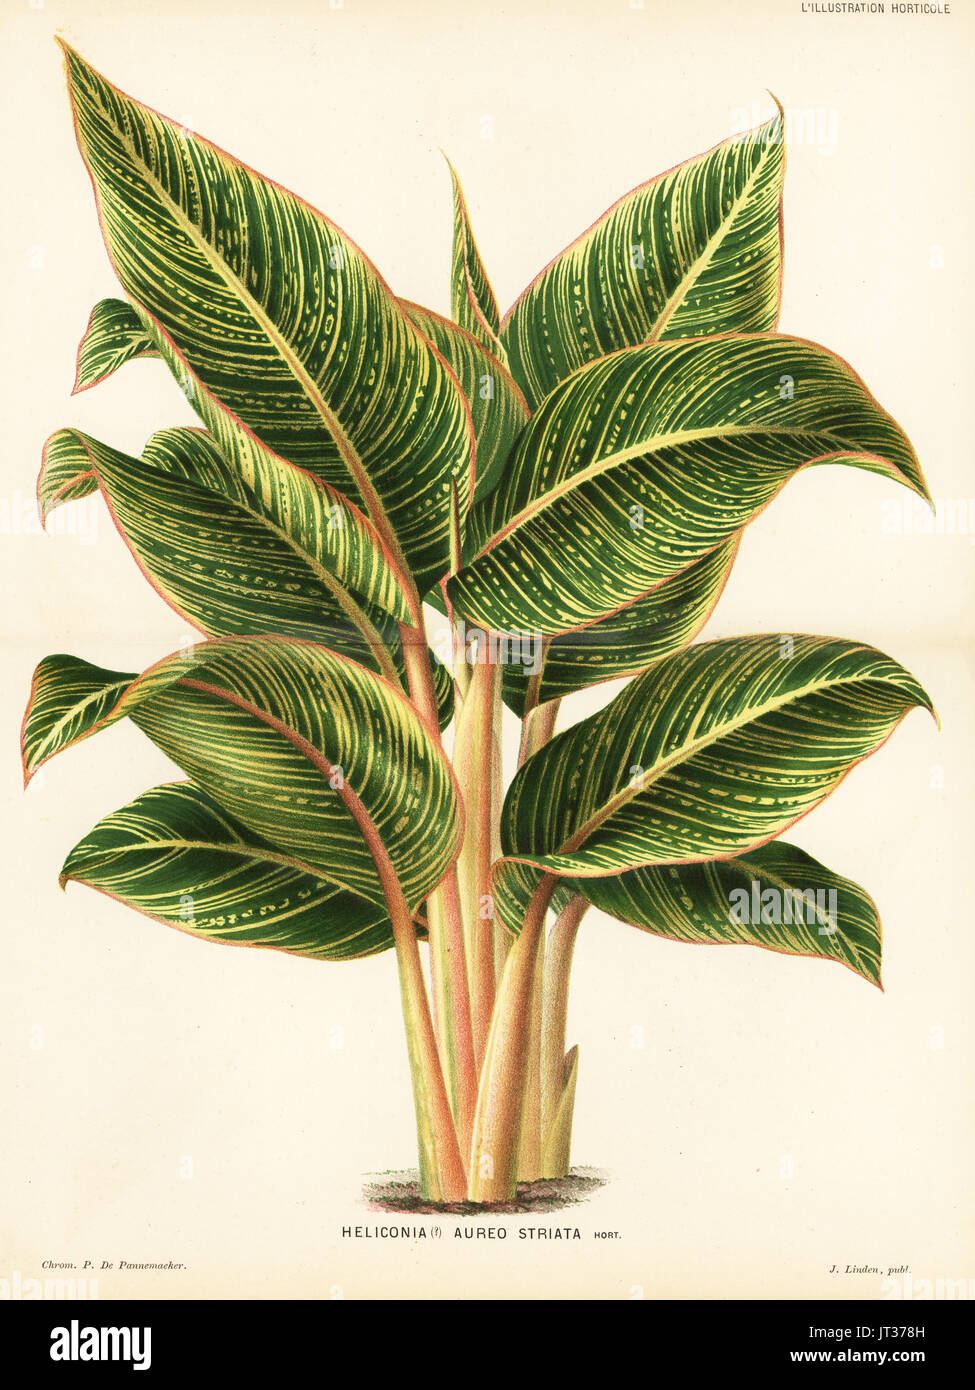 Lobster-claw plant, Heliconia wagneriana (Heliconia aureo-striata). Chromolithograph by P. de Pannemaeker from Jean Linden's l'Illustration Horticole, Brussels, 1882. Stock Photo